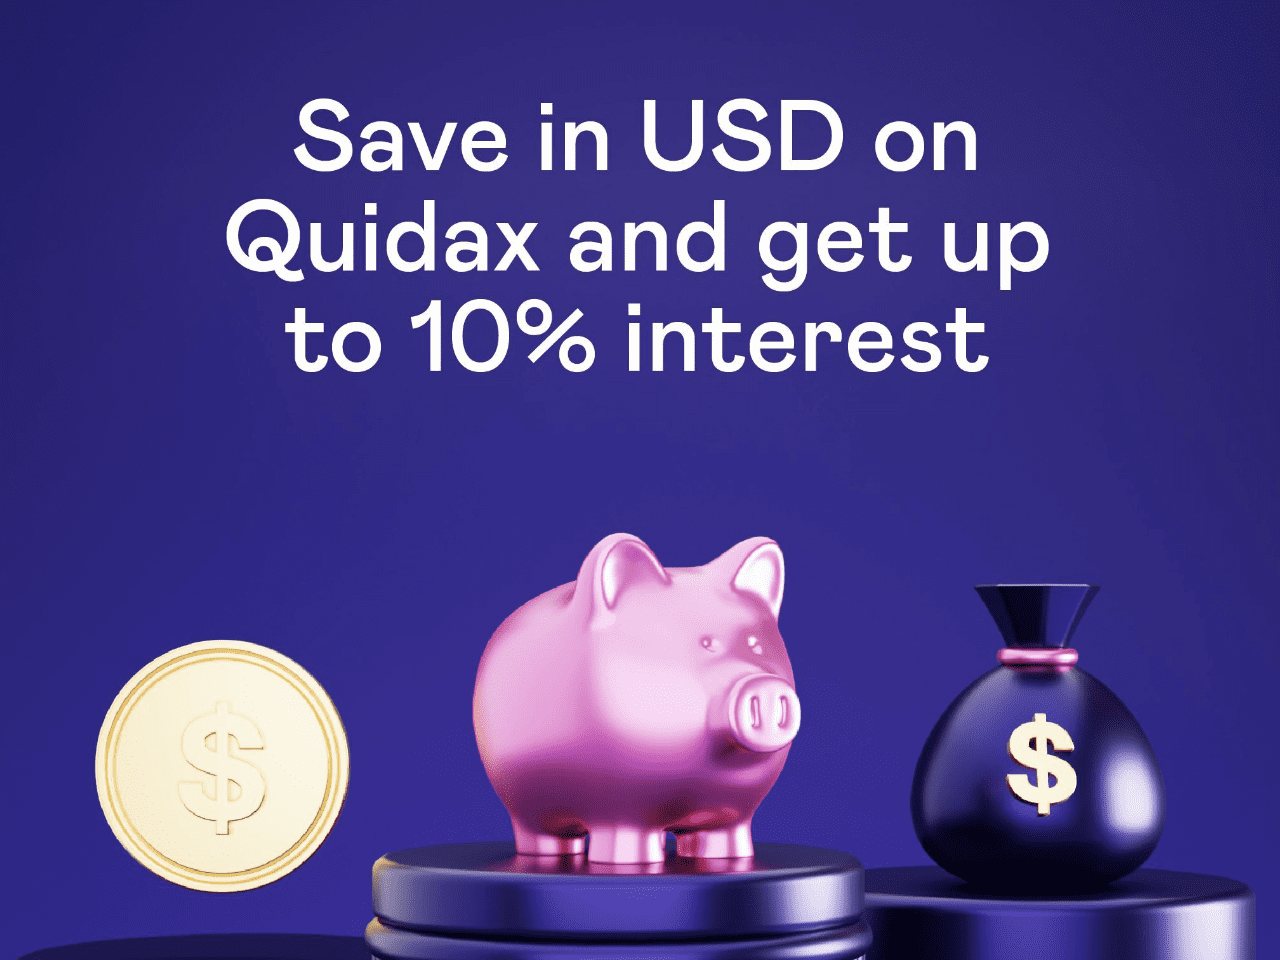 Quidax launches US Dollar (USD) savings with to up 10% interest